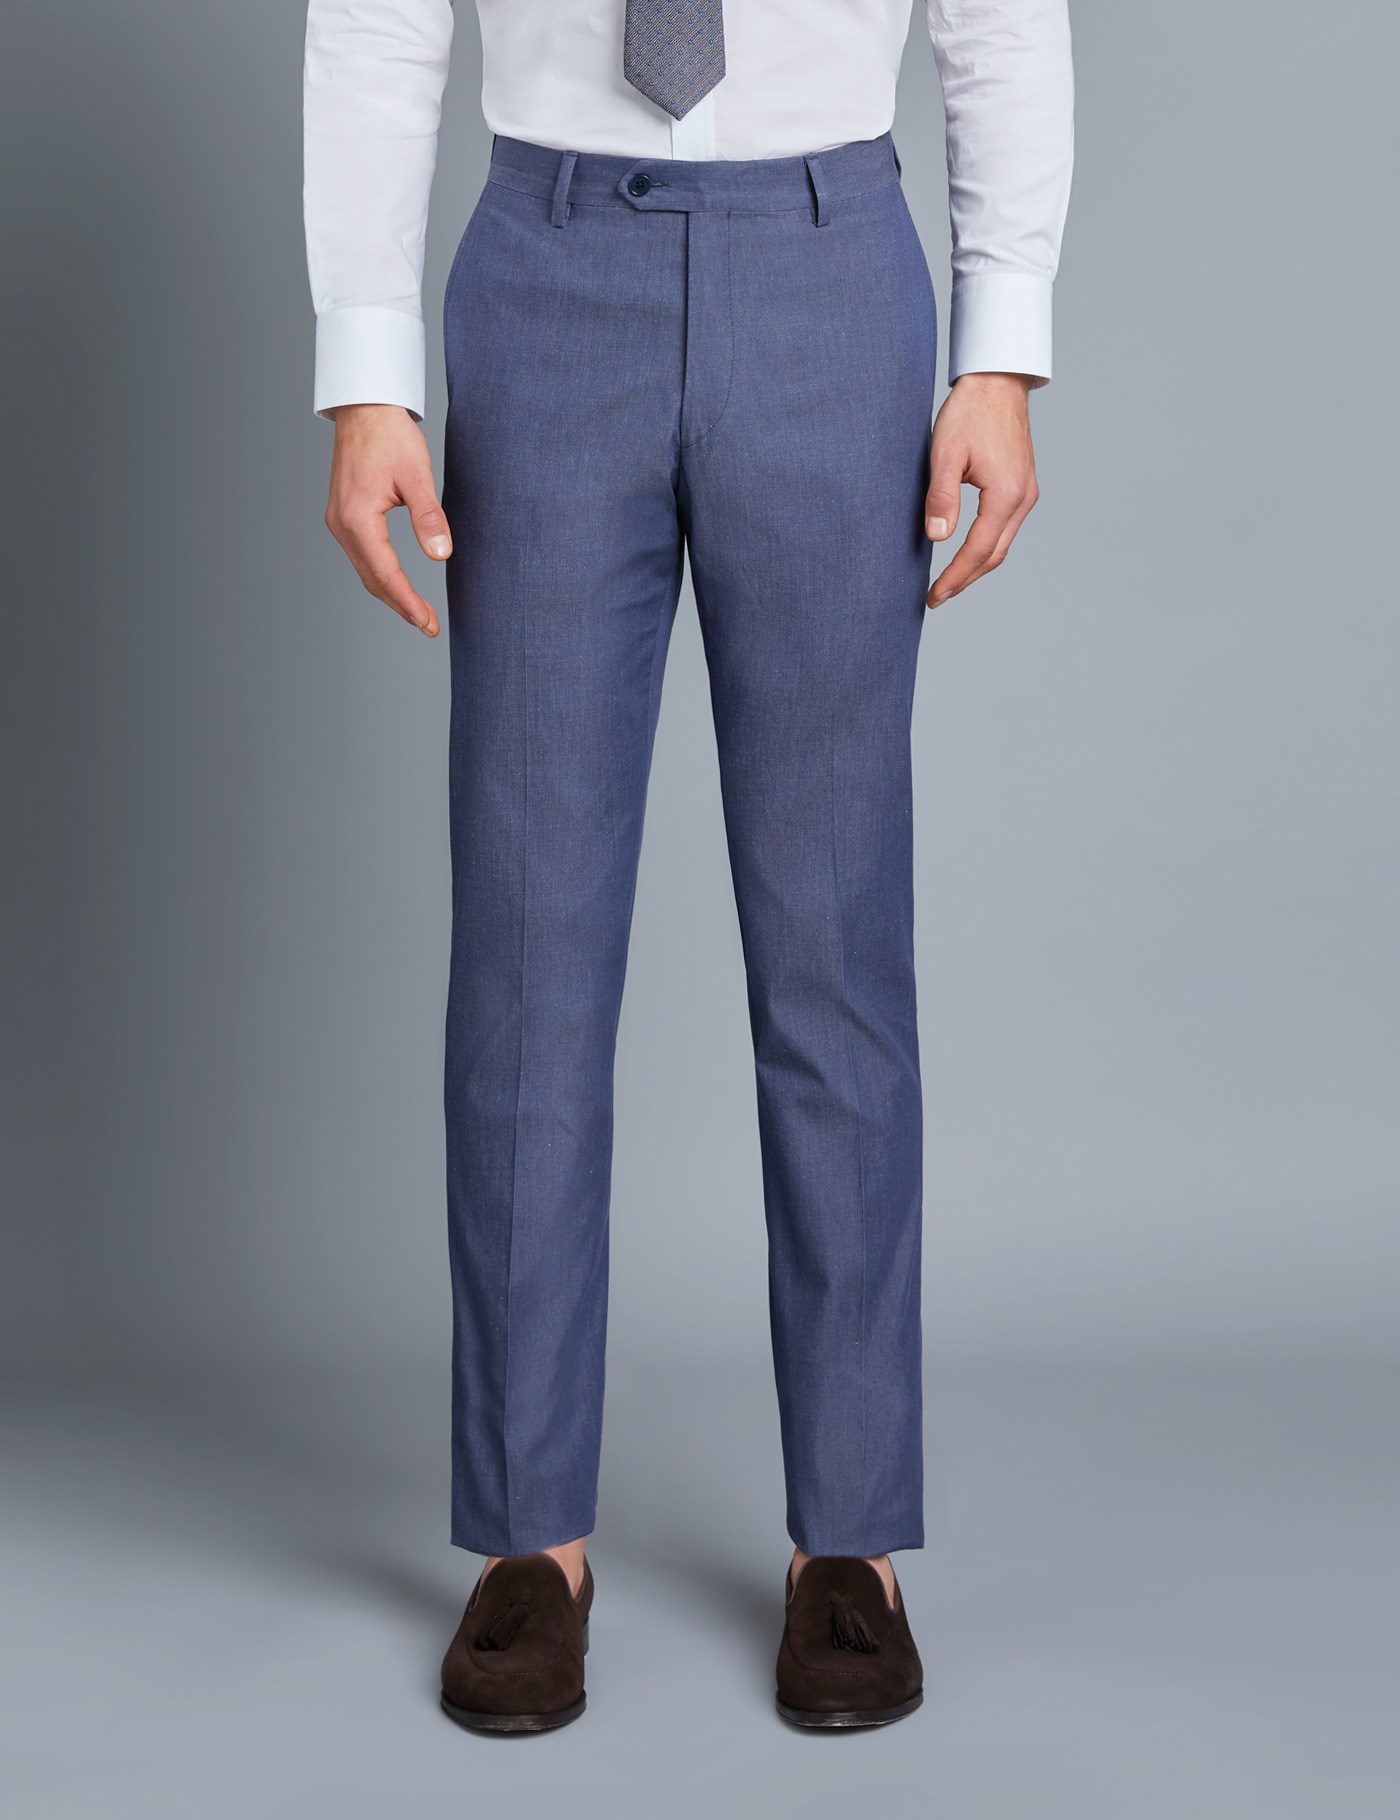 Men’s Blue Italian Cotton Trousers - 1913 Collection | Hawes & Curtis